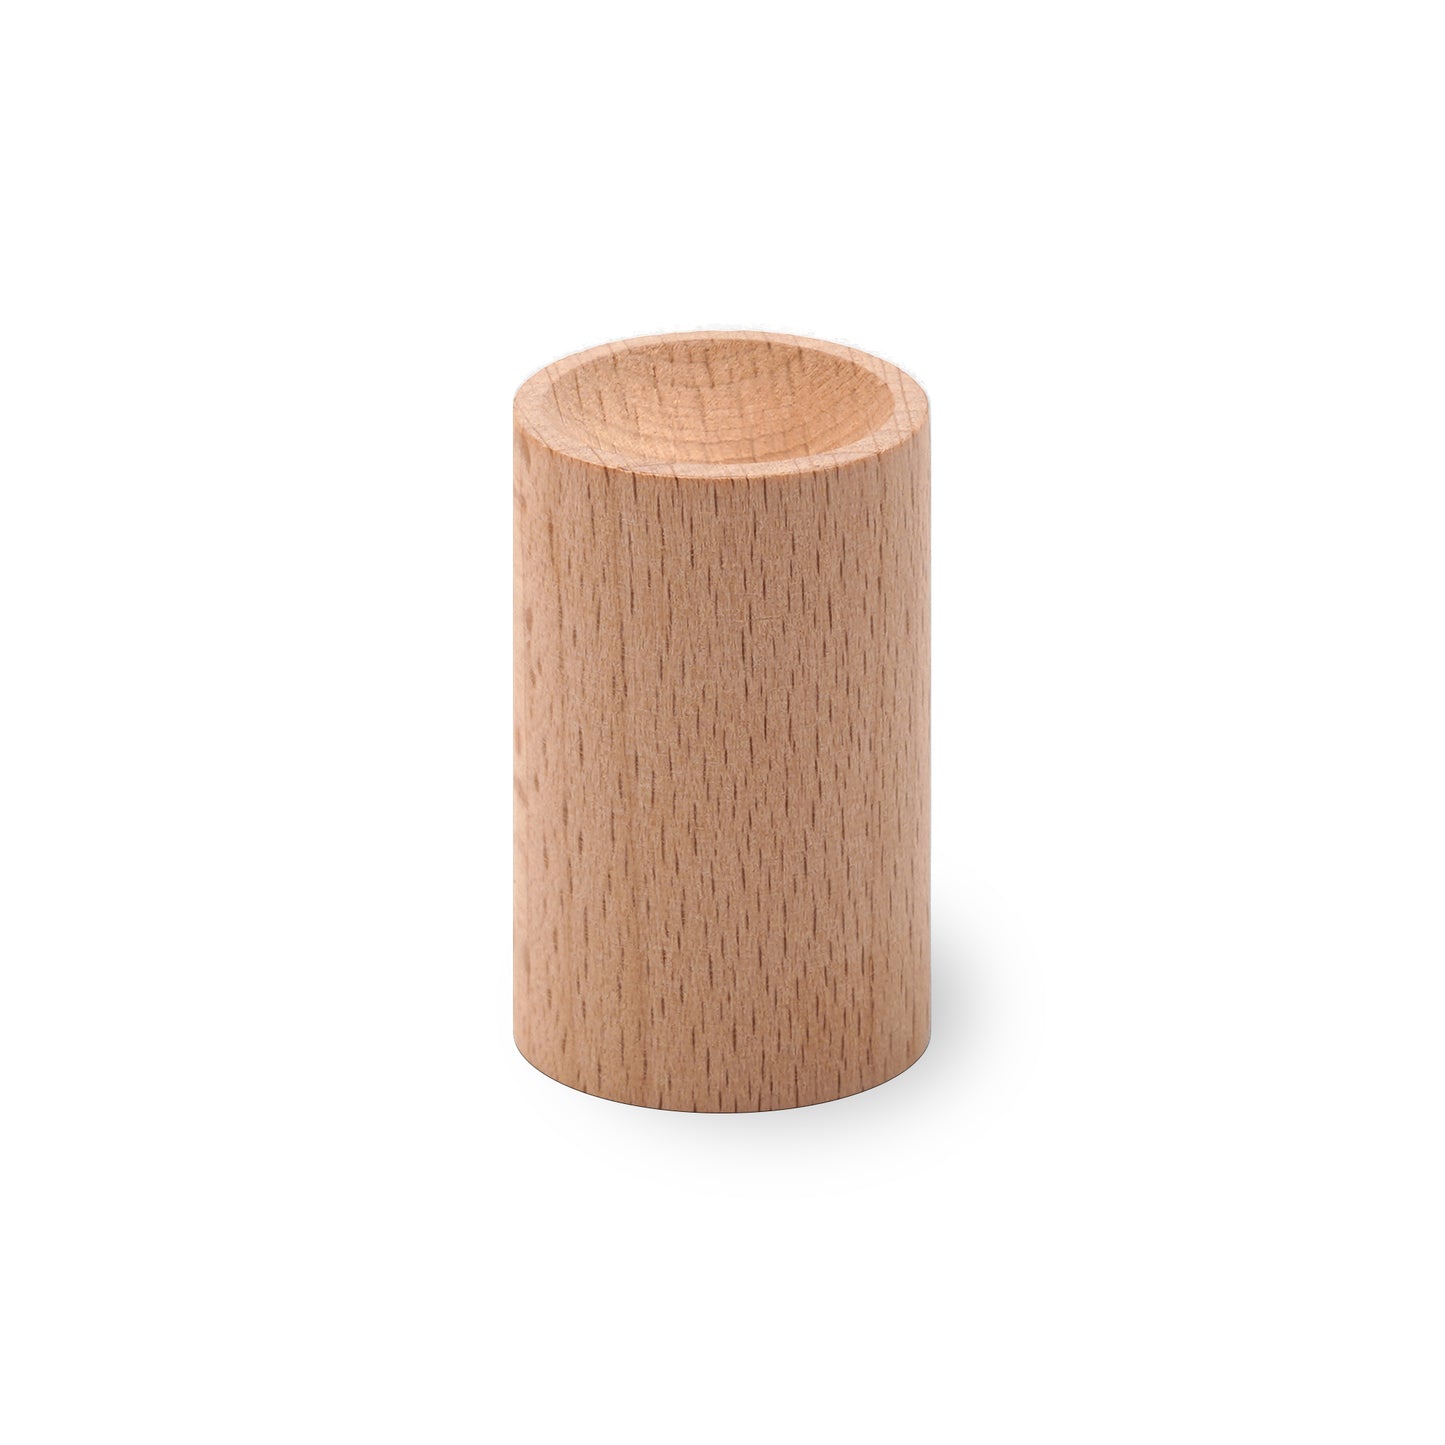 Cylindrical wood diffuser